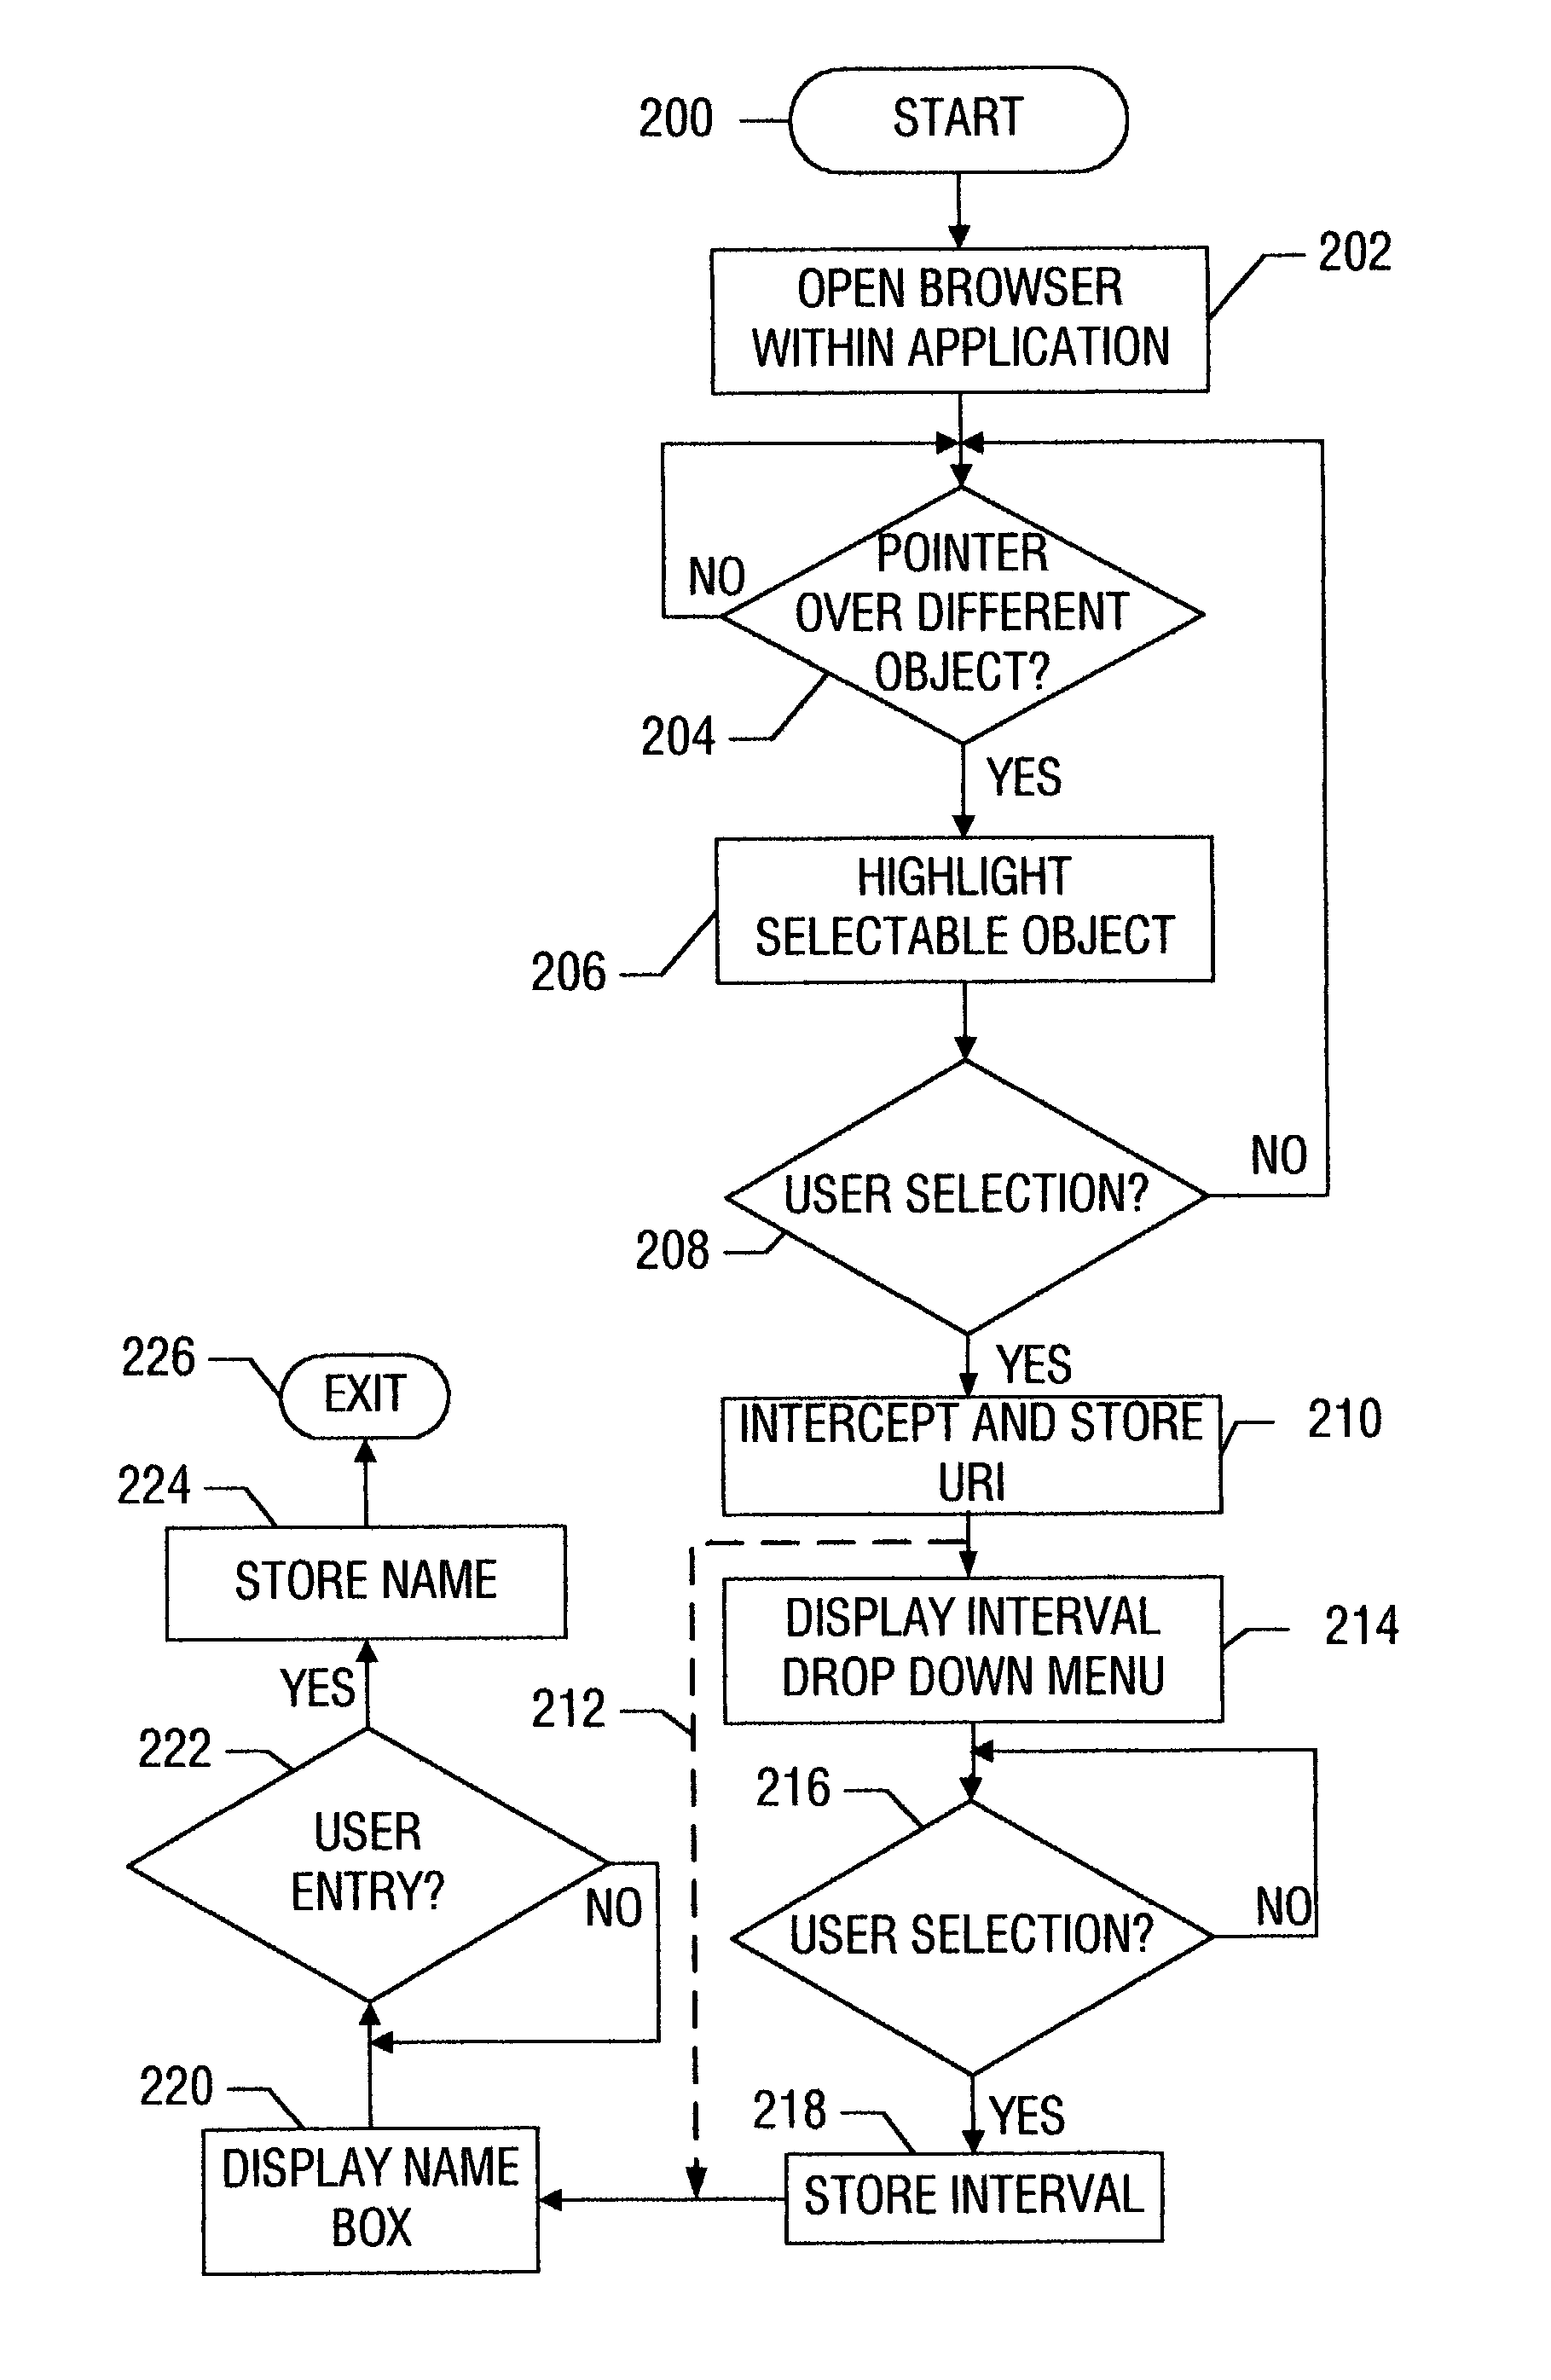 Apparatus and methods to select and access displayed objects